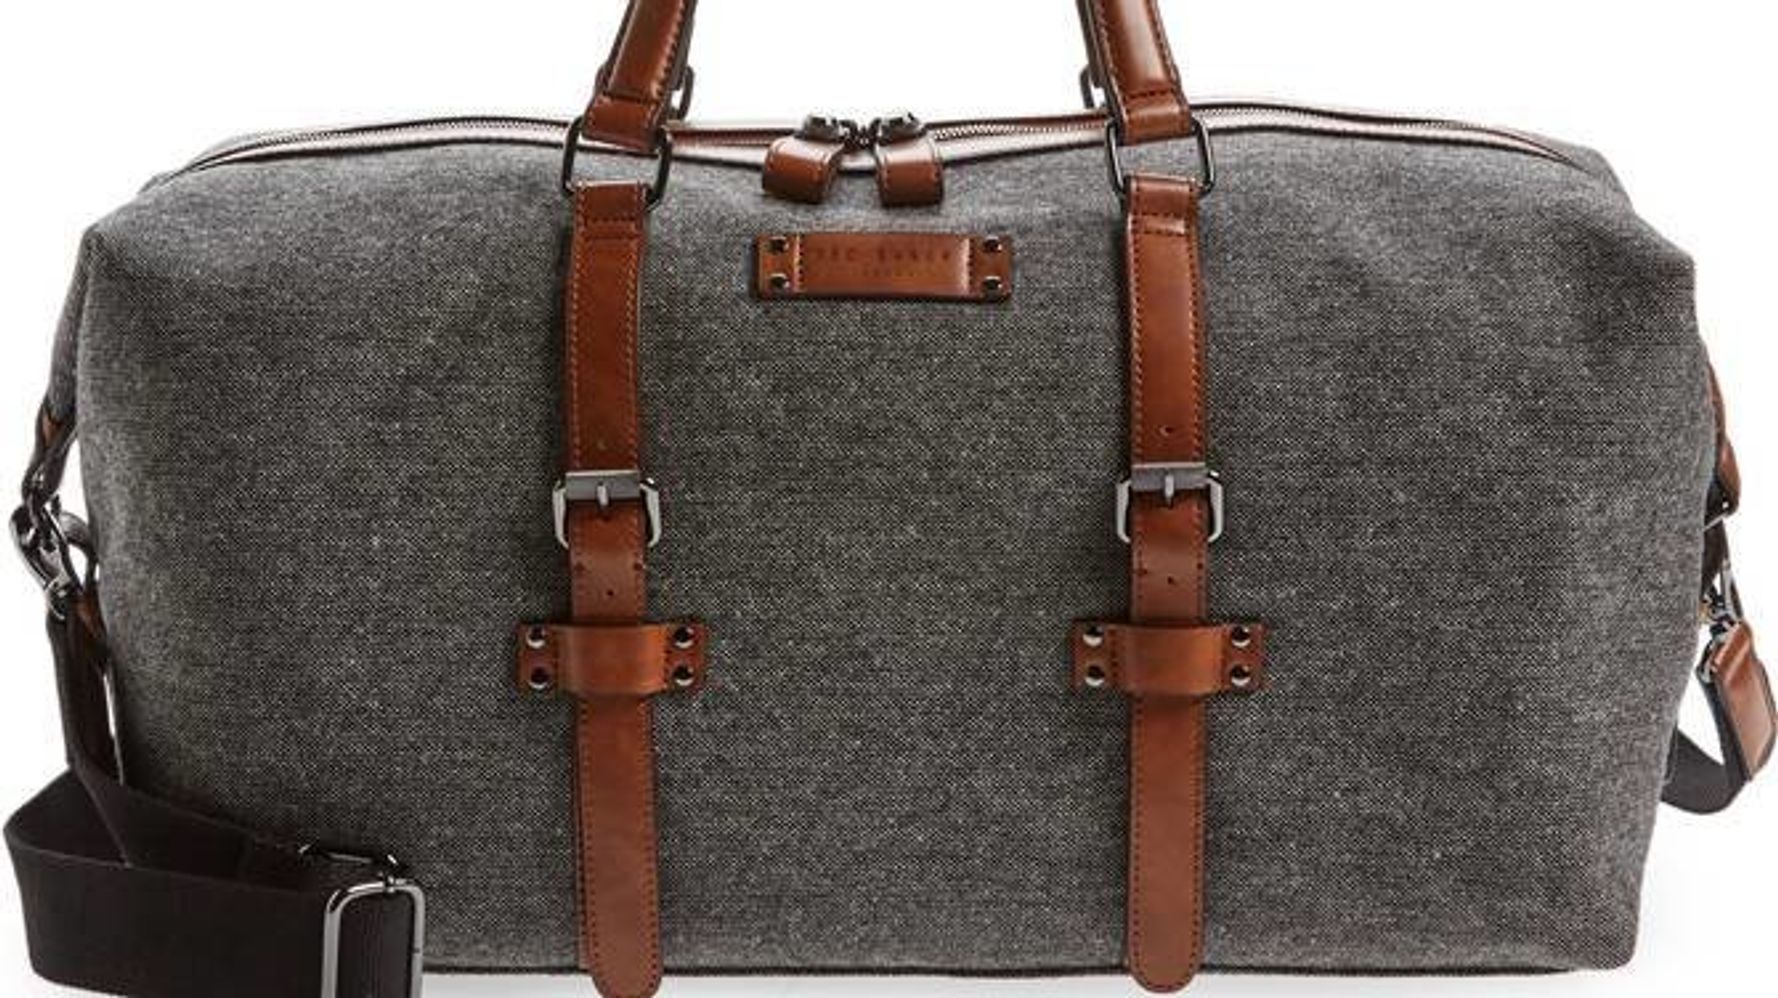 Best Duffel Bags and Travel Bags for Men